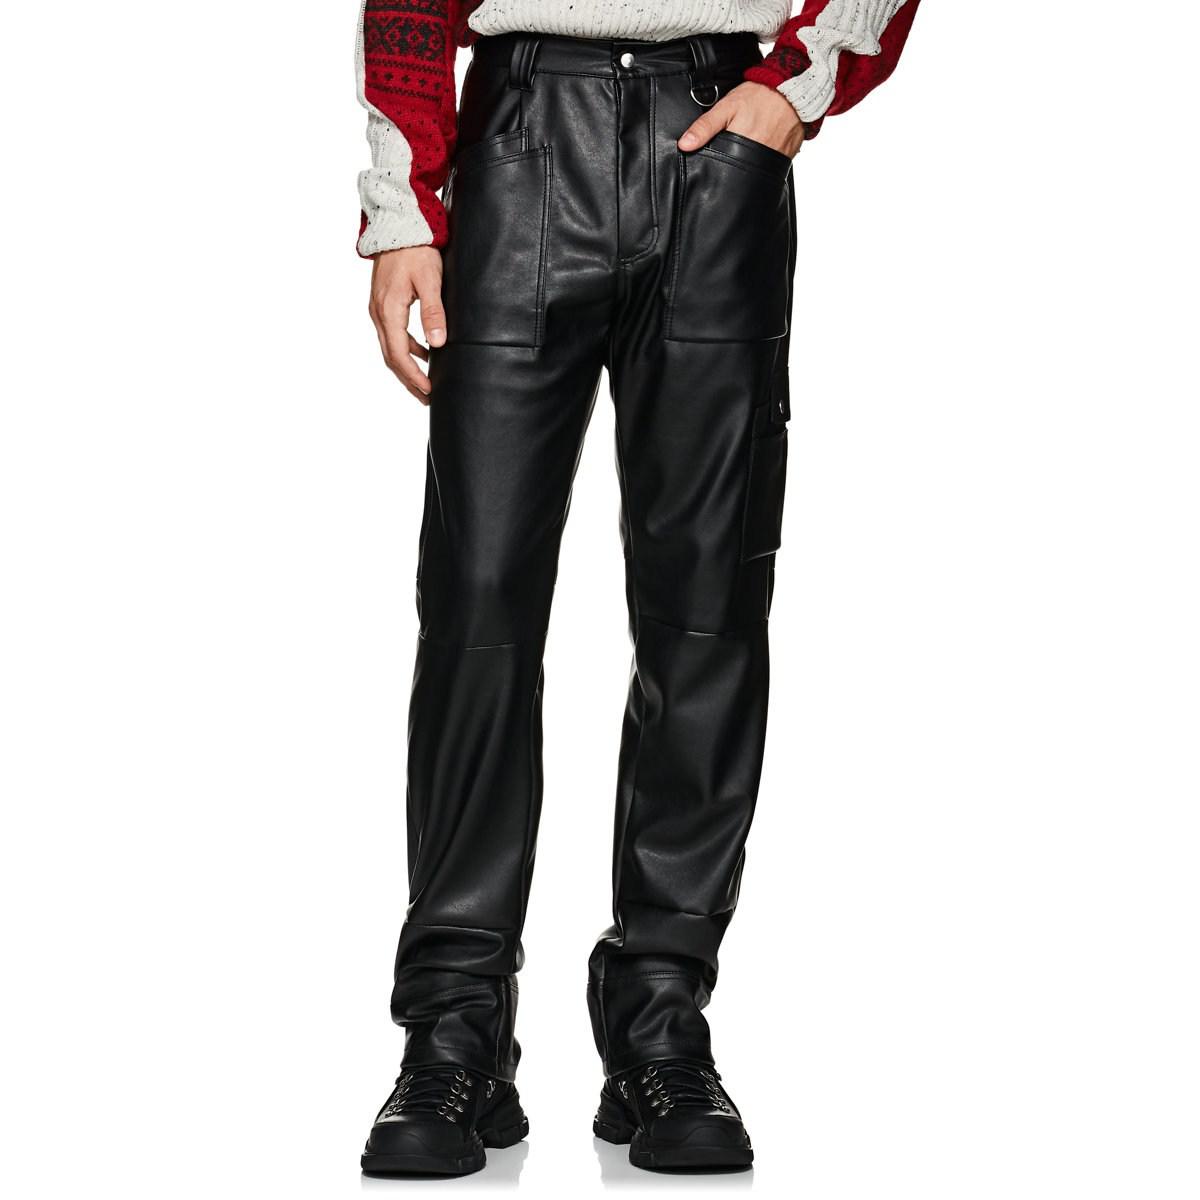 GmbH Faux-leather Workman Pants in Black for Men - Lyst